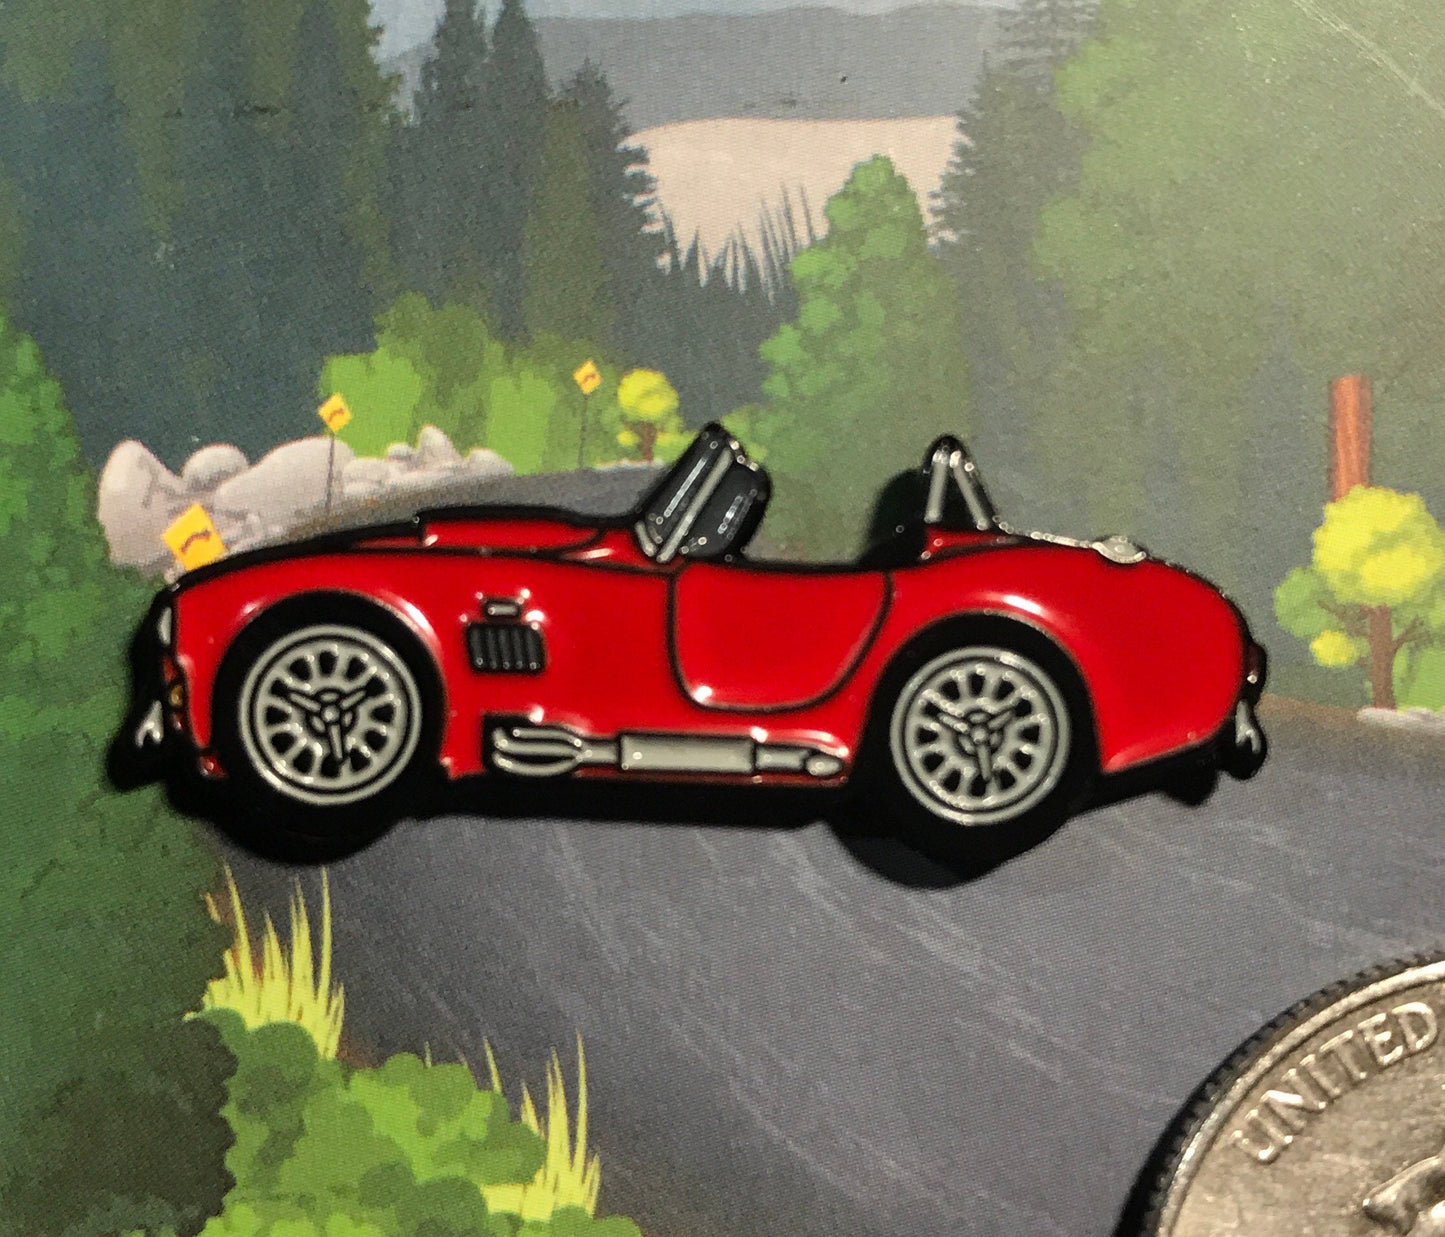 AC Shelby Cobra Enamel Auto Lapel Pin Badge available in 5 colors RED